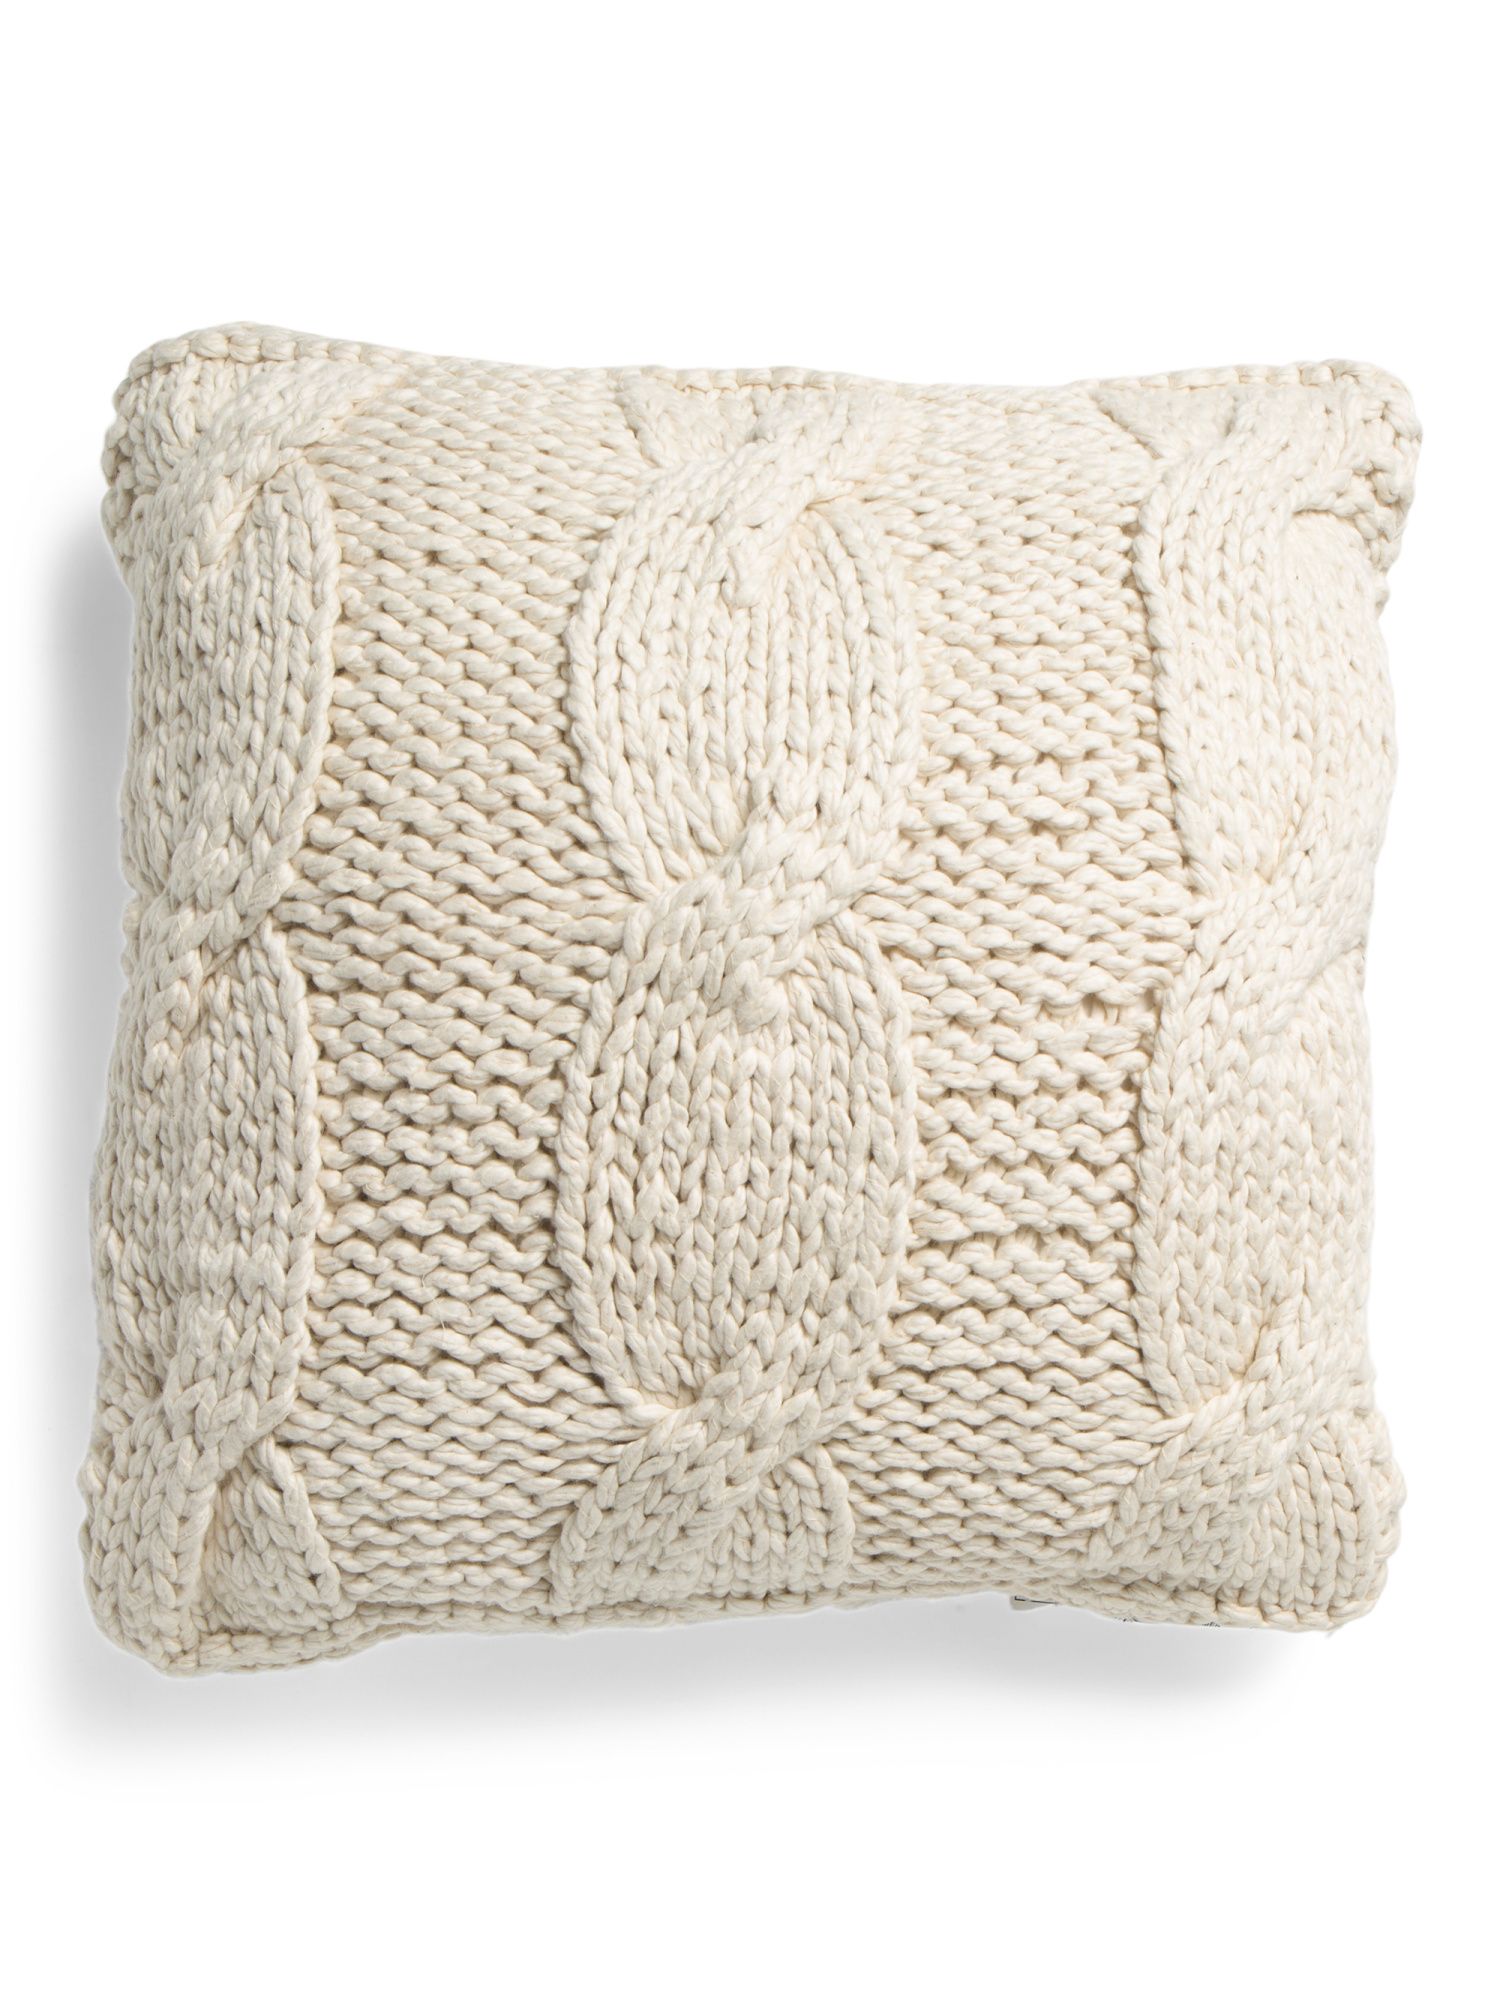 20x20 Cable Knit Pillow | TJ Maxx